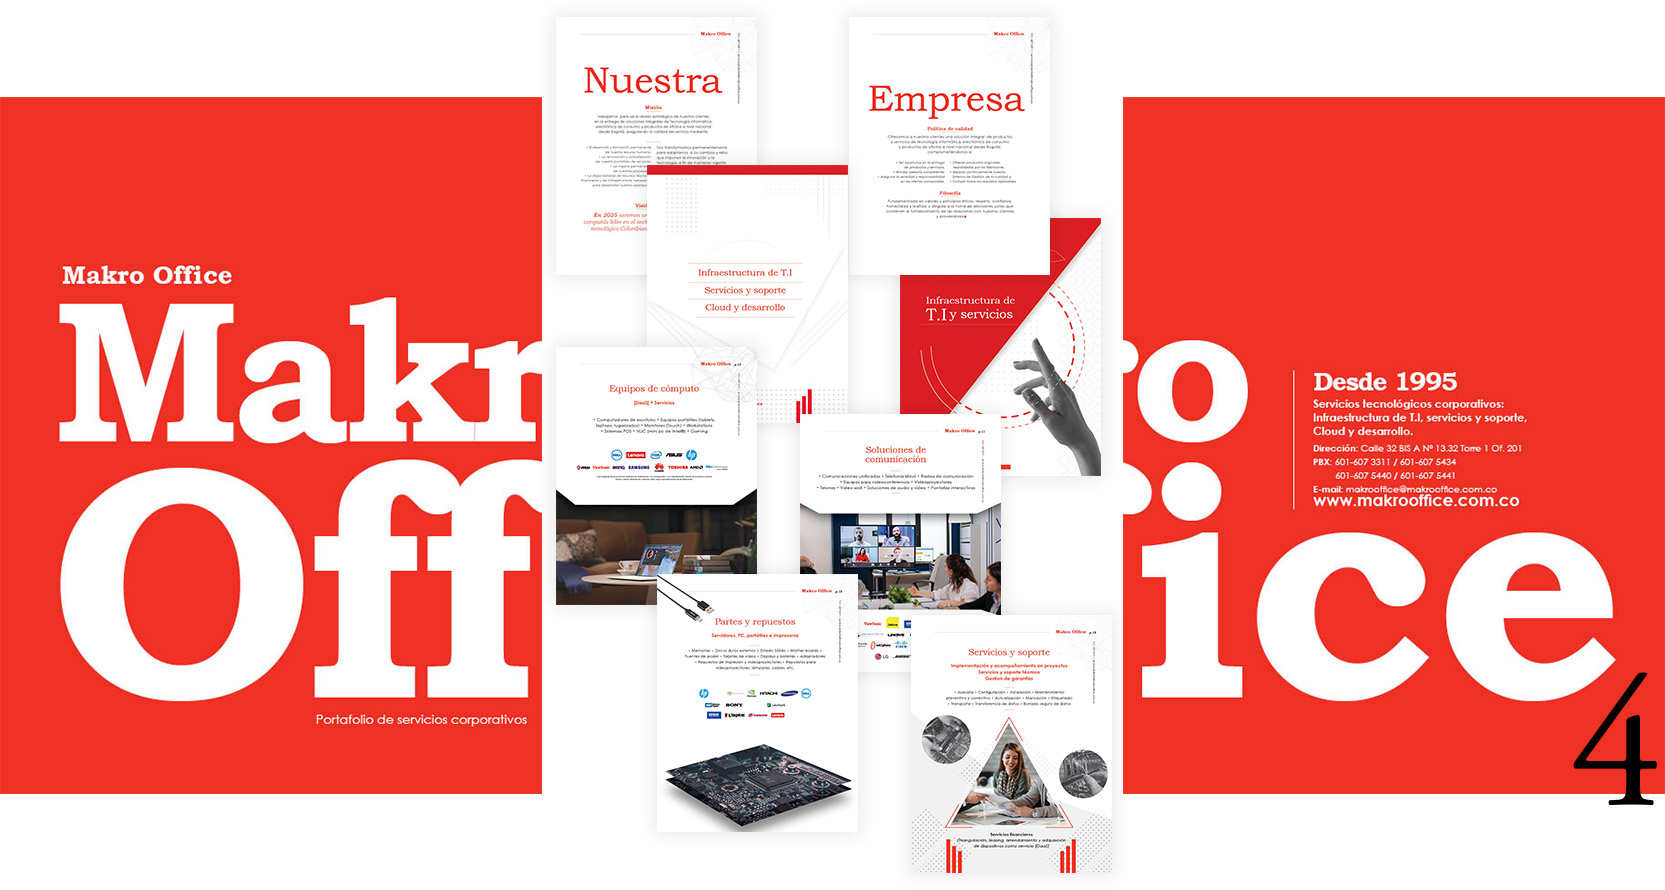 Typographic compositions and screenshots of some internal pages of Makro Office's corporate services portfolio.